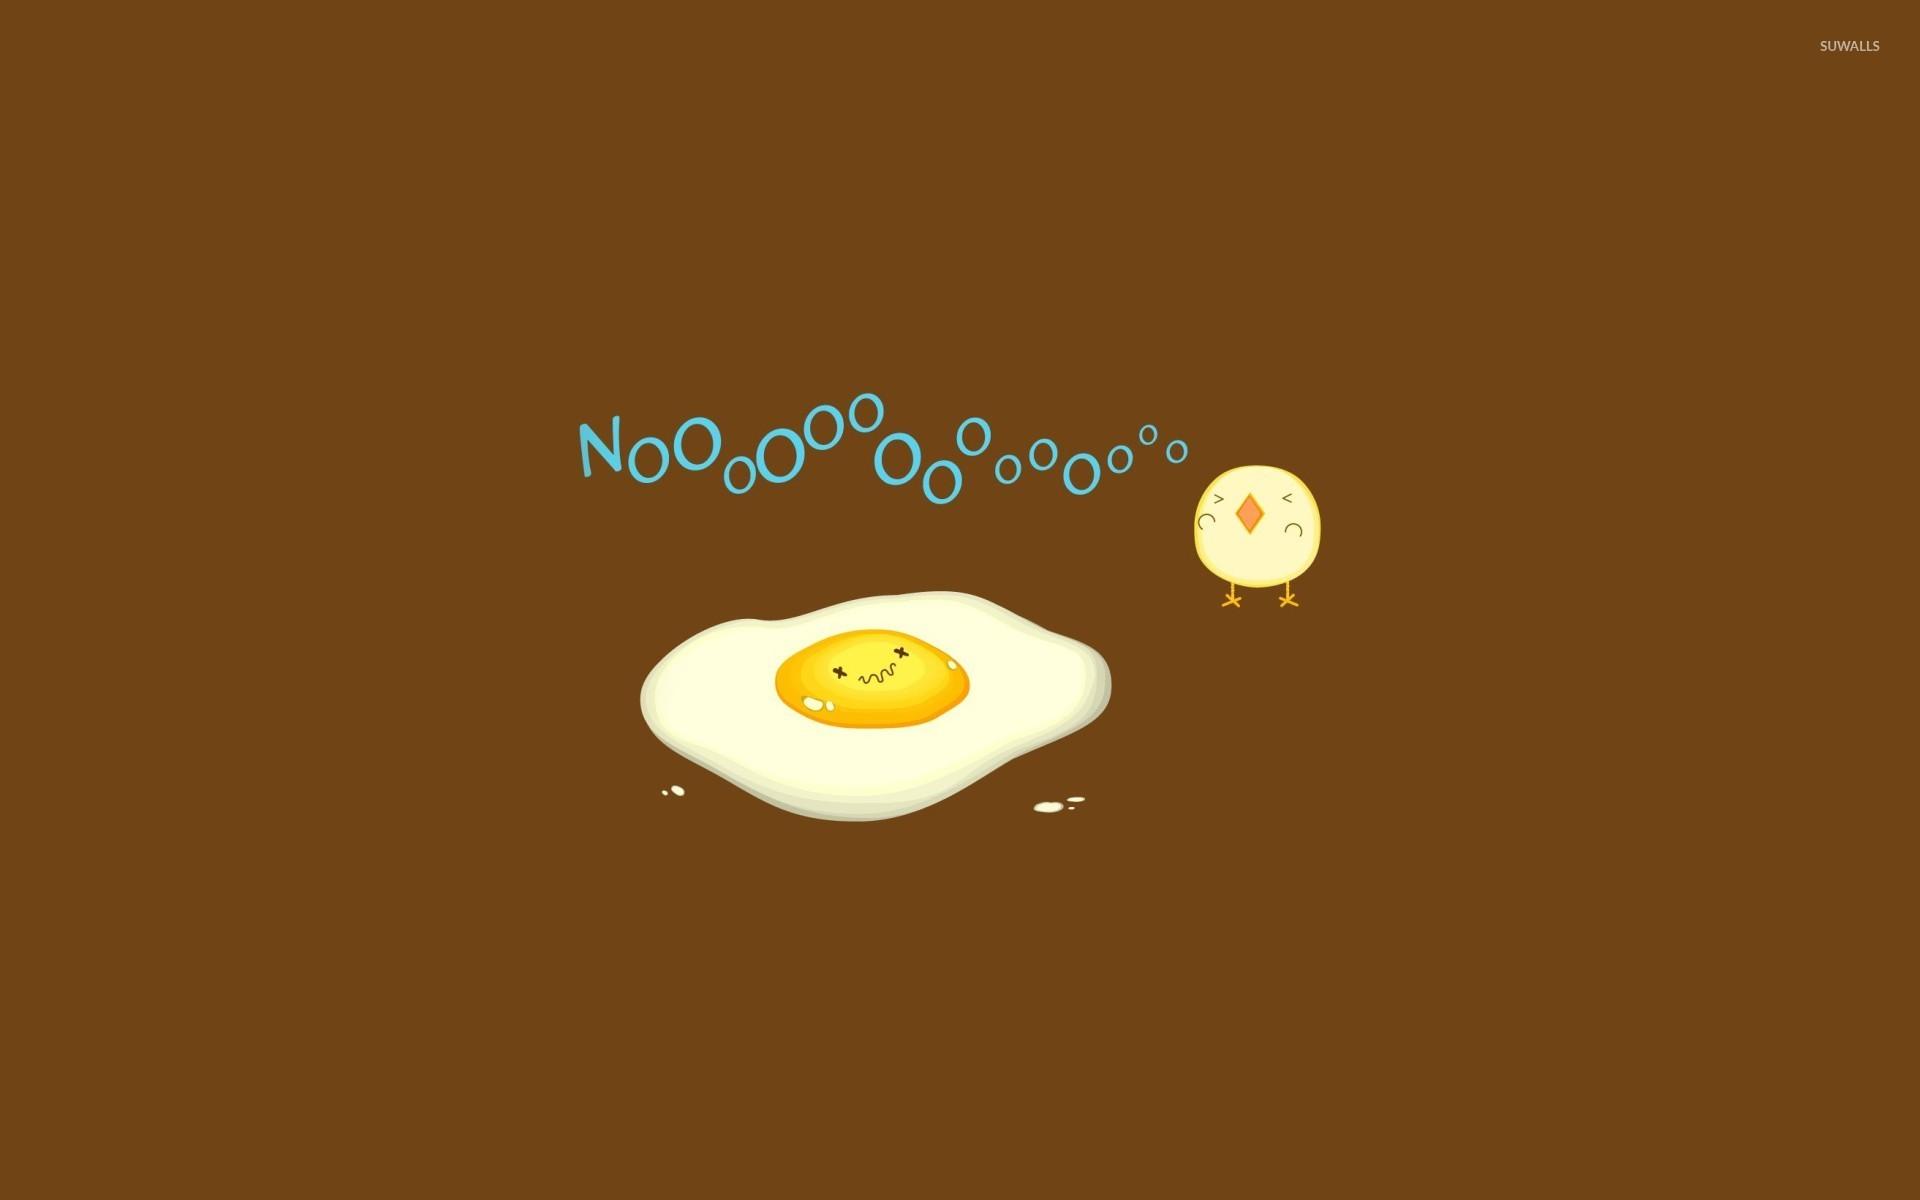 Chick and fried egg wallpaper wallpaper